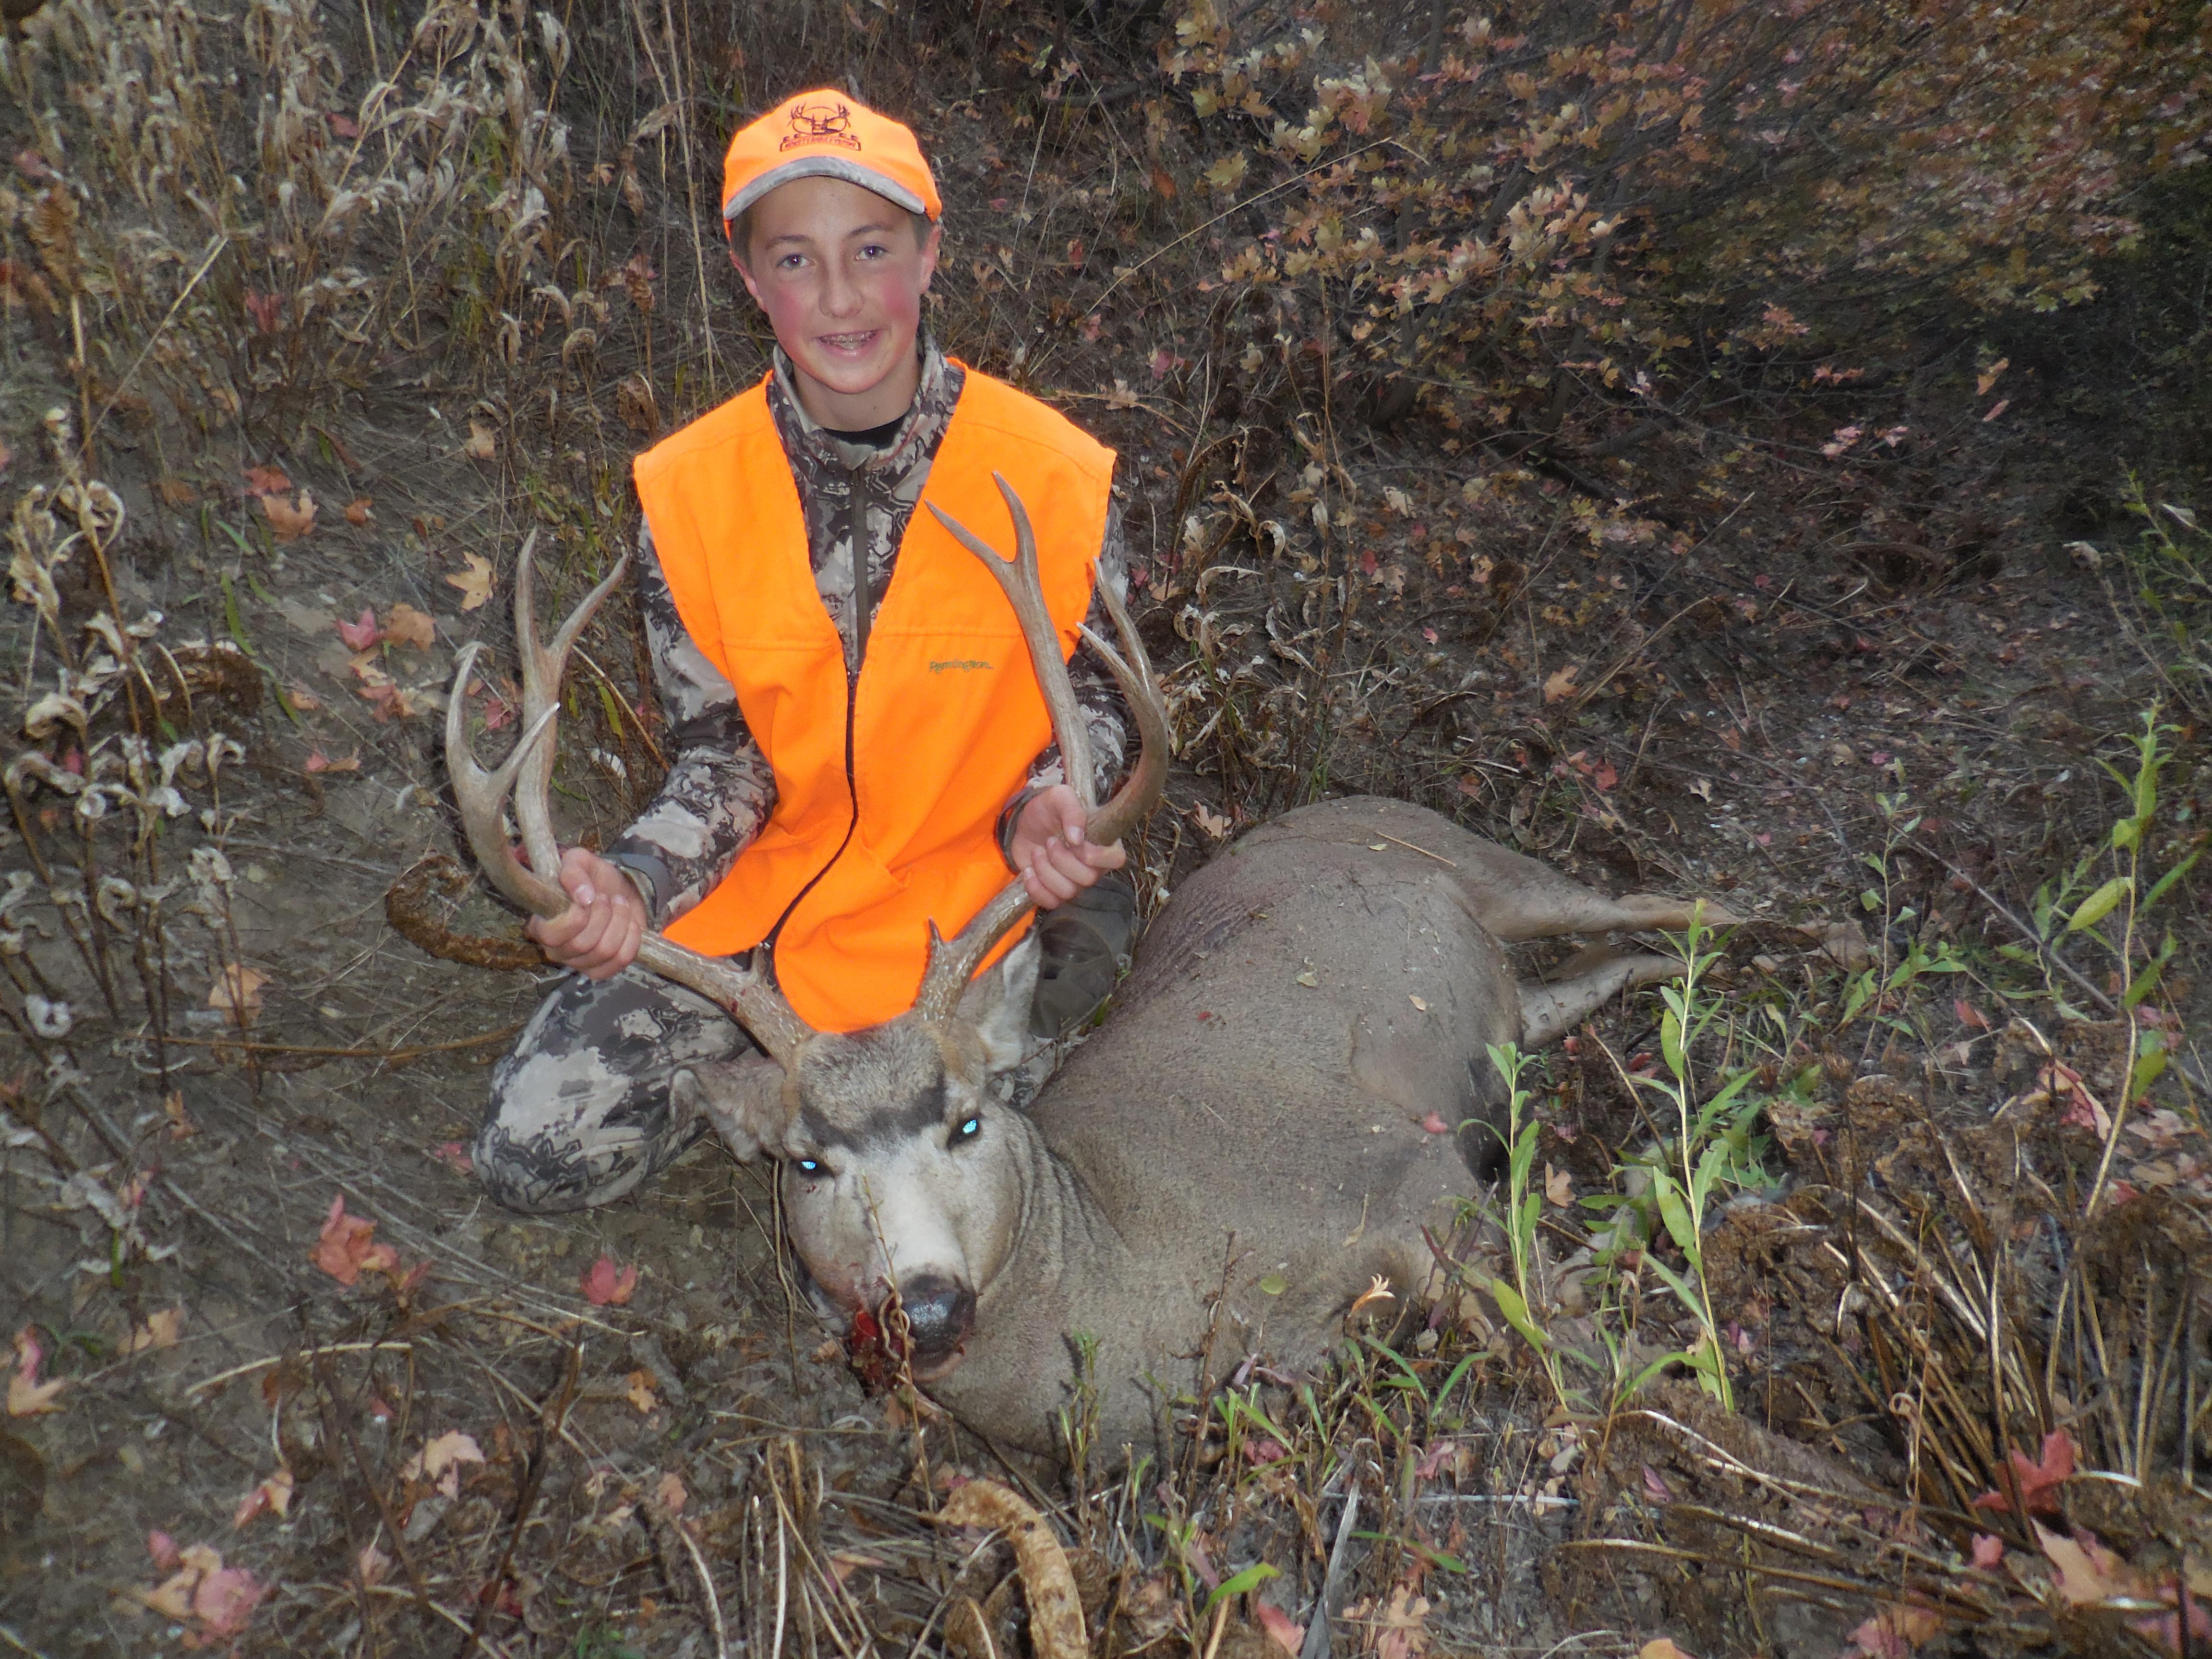 Anden and his buck